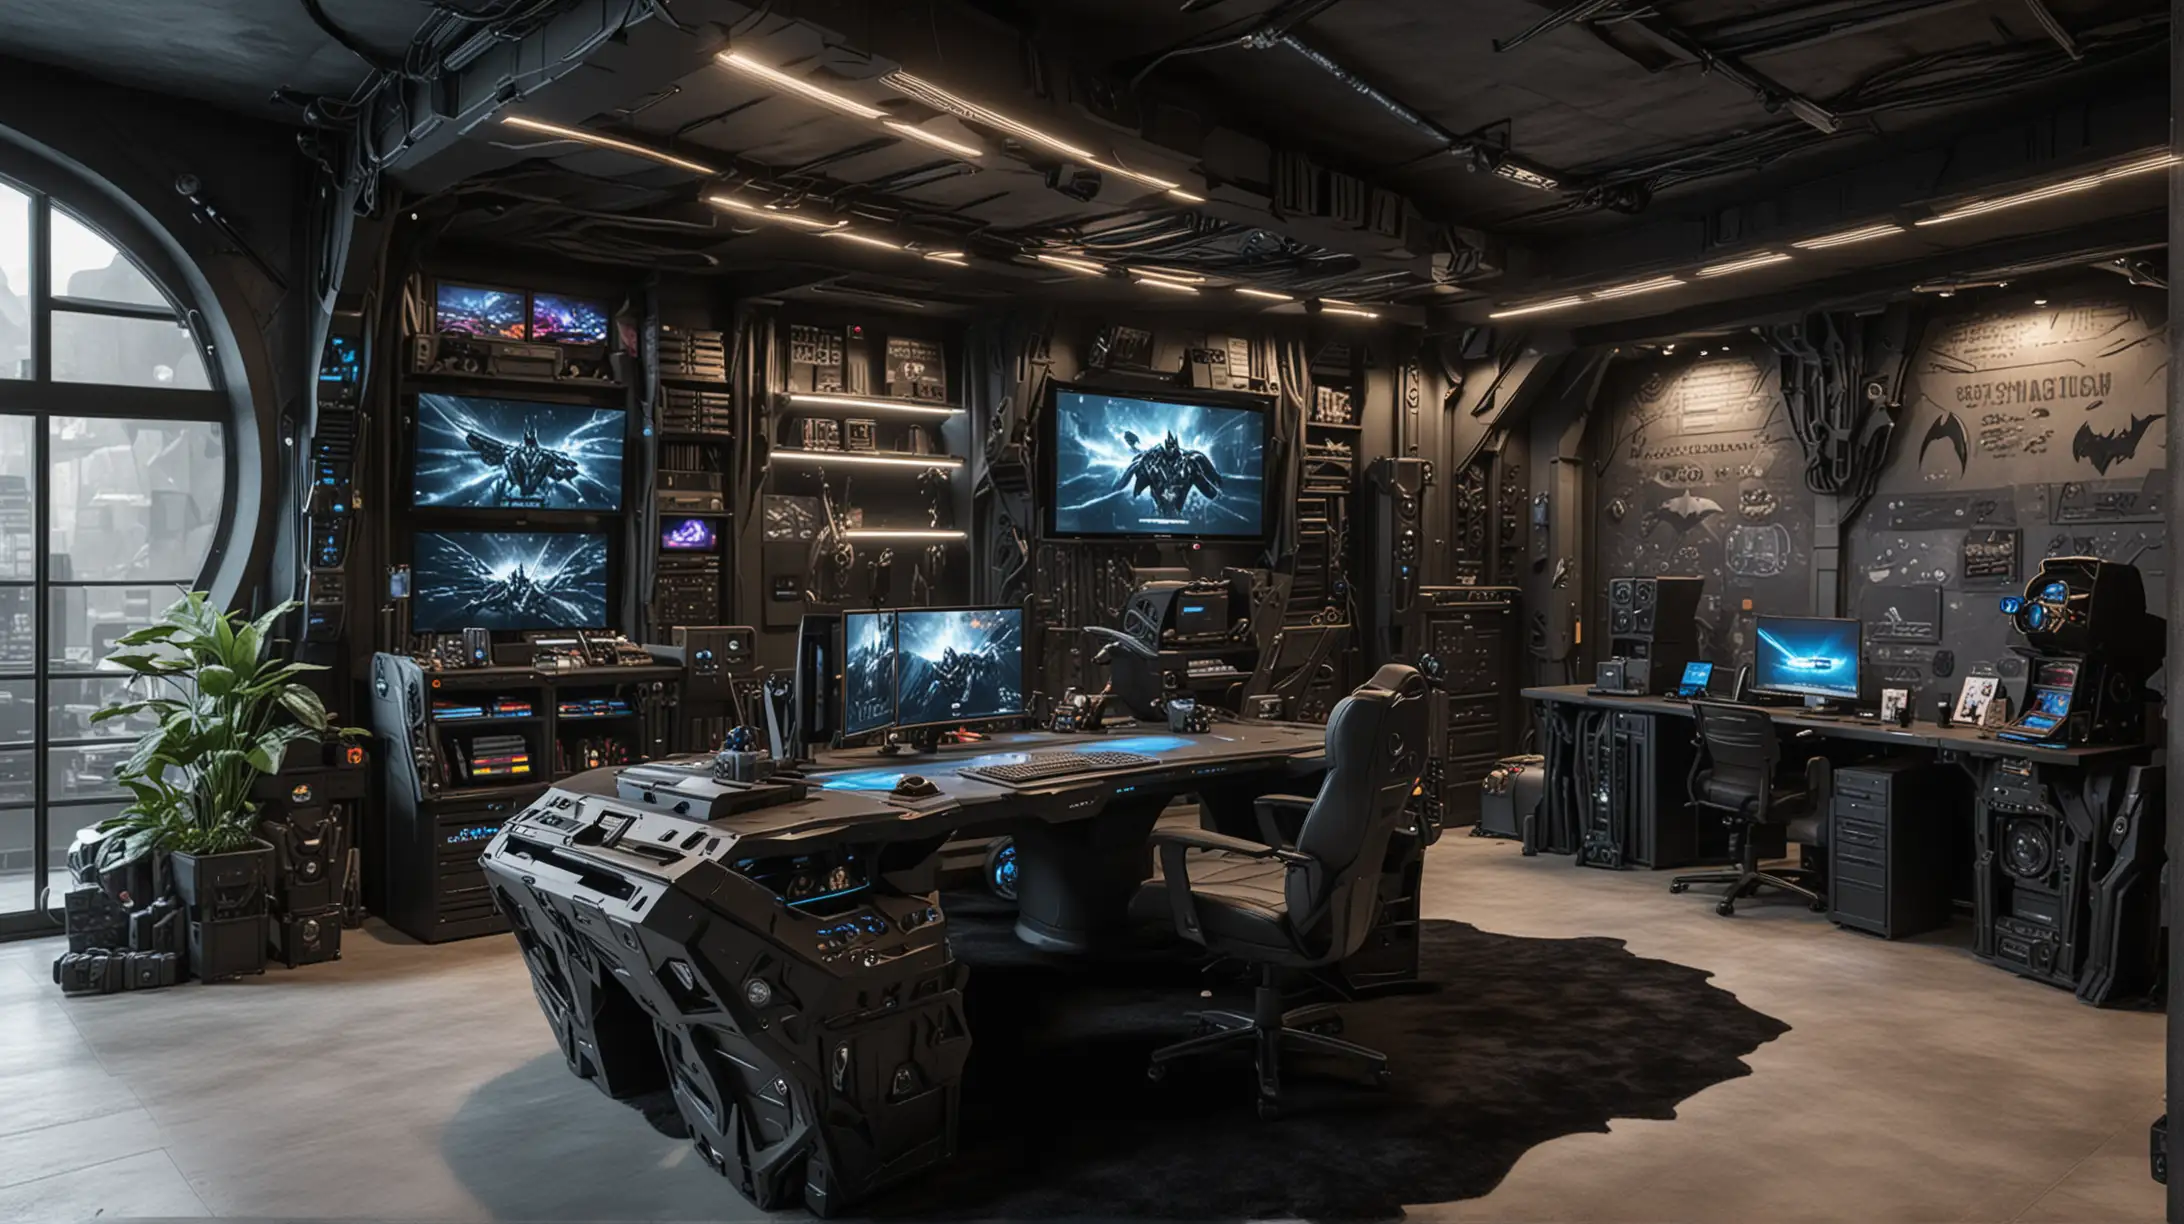 Futuristic SuperComputer Desk Setup and Playroom Inspired by the Batcave